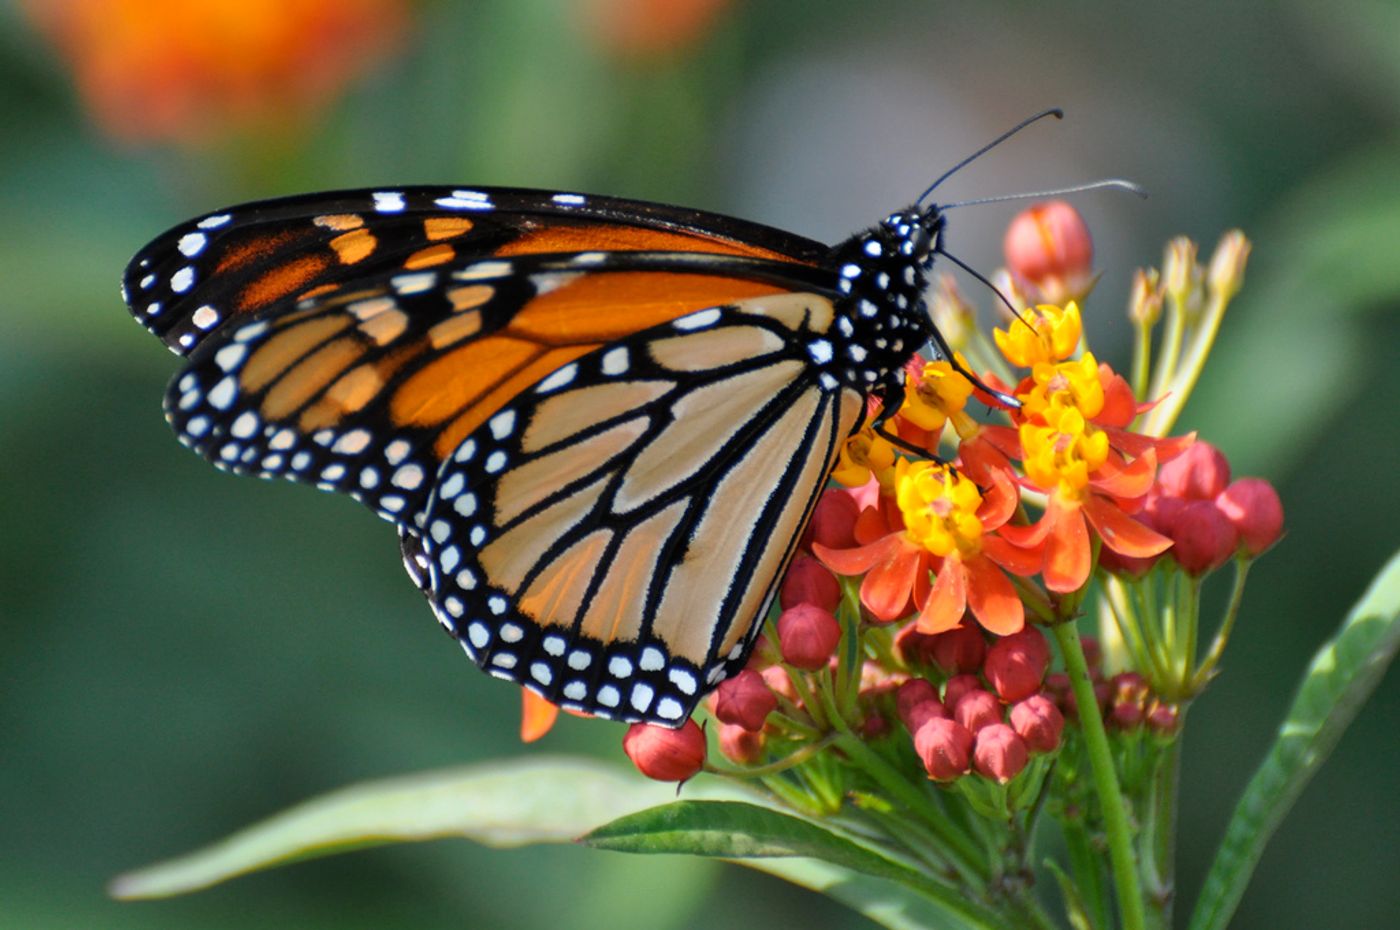 Monarchs may be forging new migration patterns. Photo: climatehealers.org